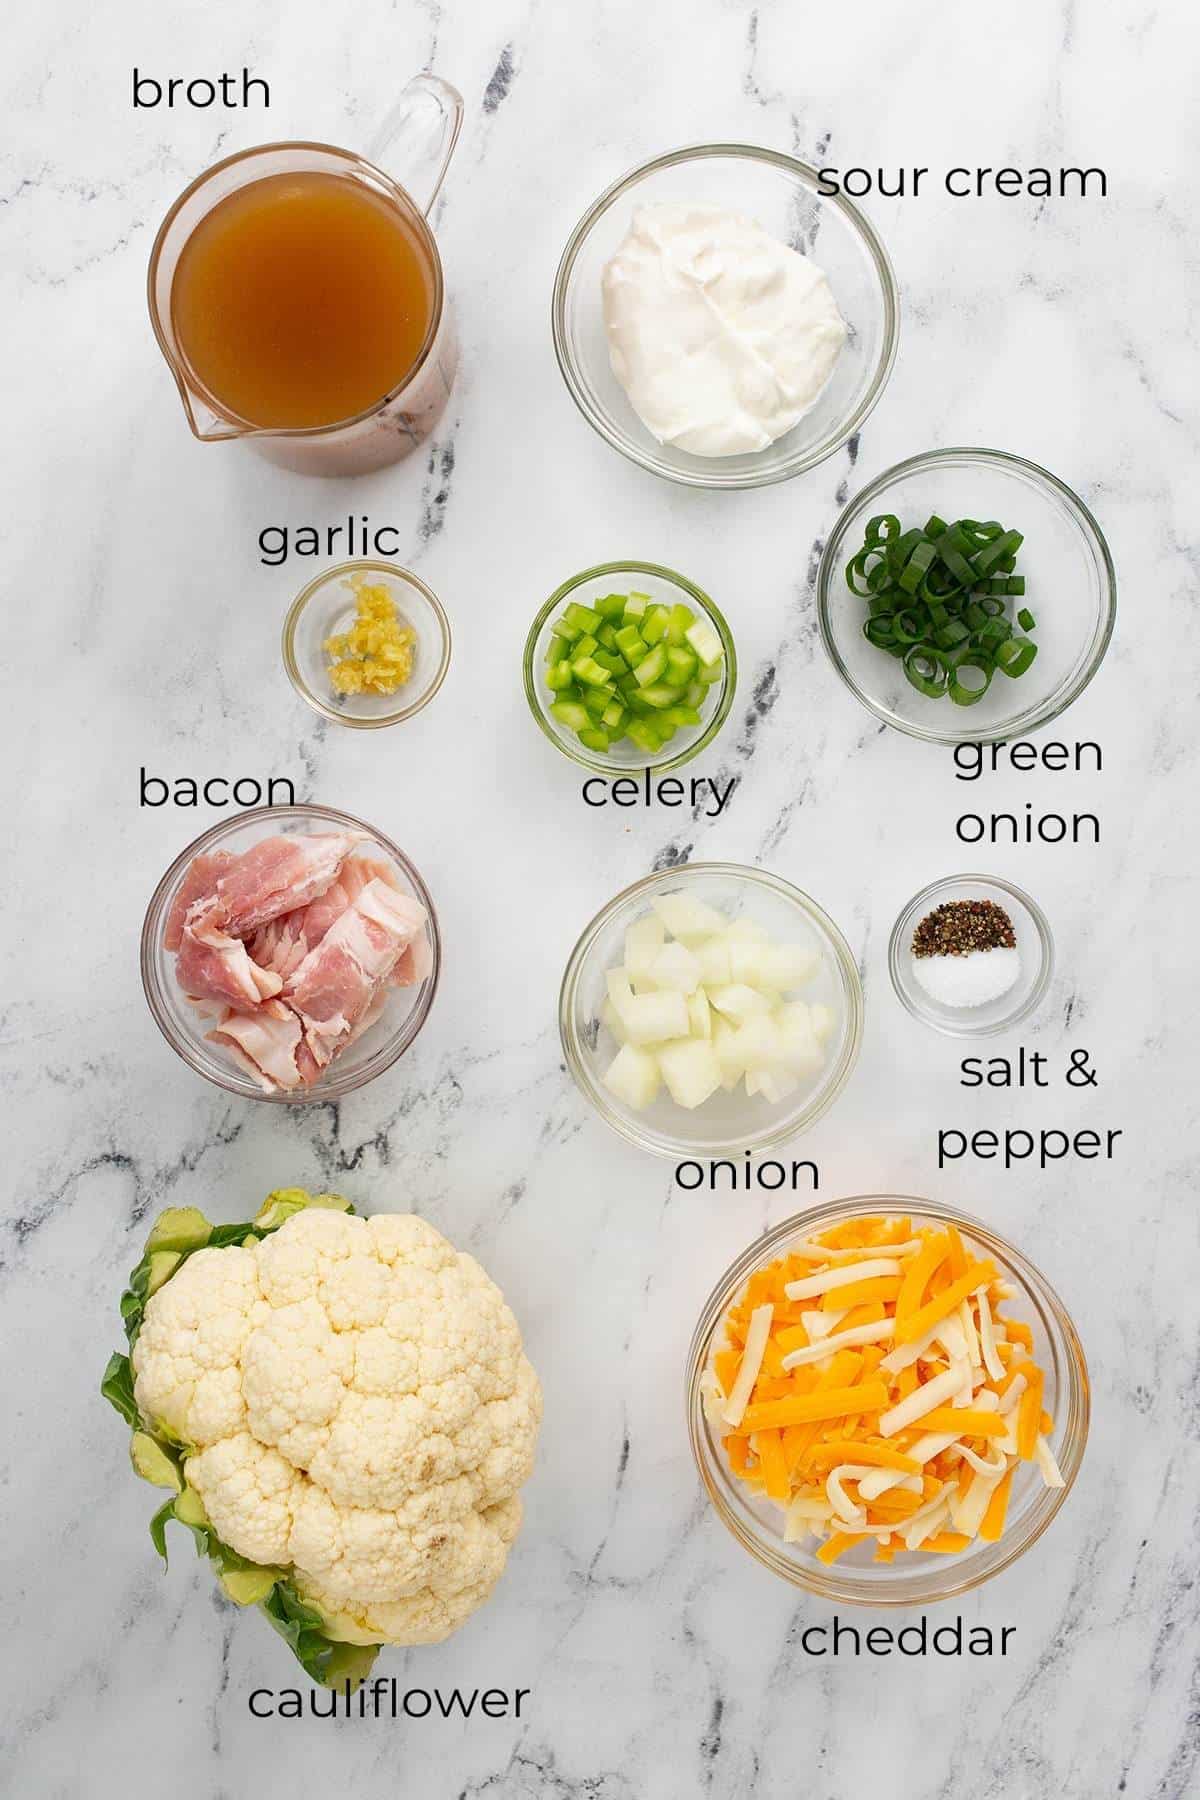 Top down image of ingredients needed for Loaded Cauliflower Soup.